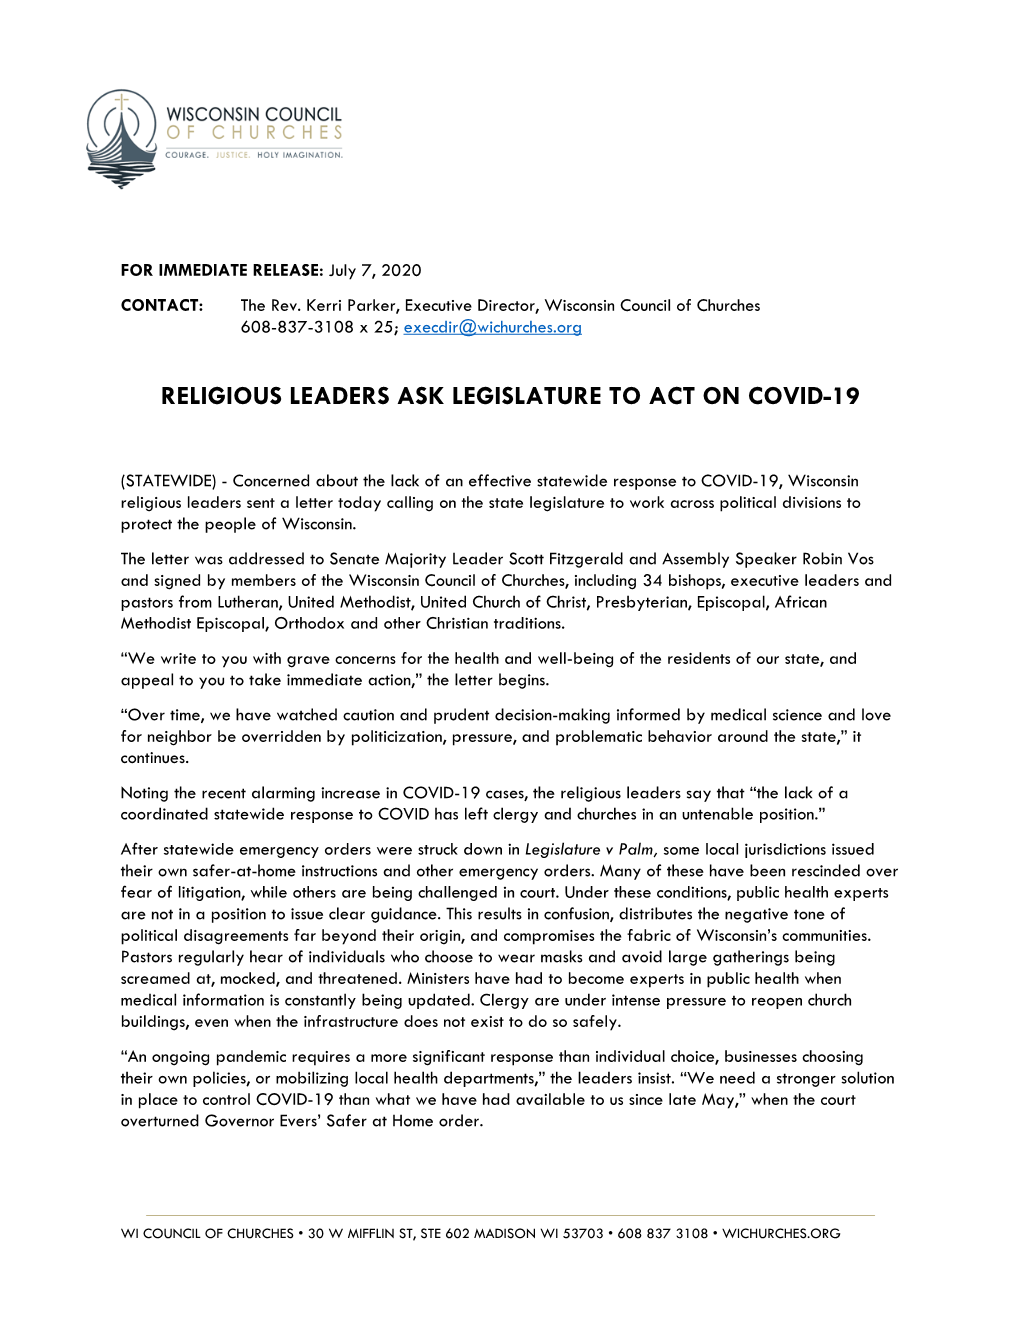 Religious Leaders Ask Legislature to Act on Covid-19